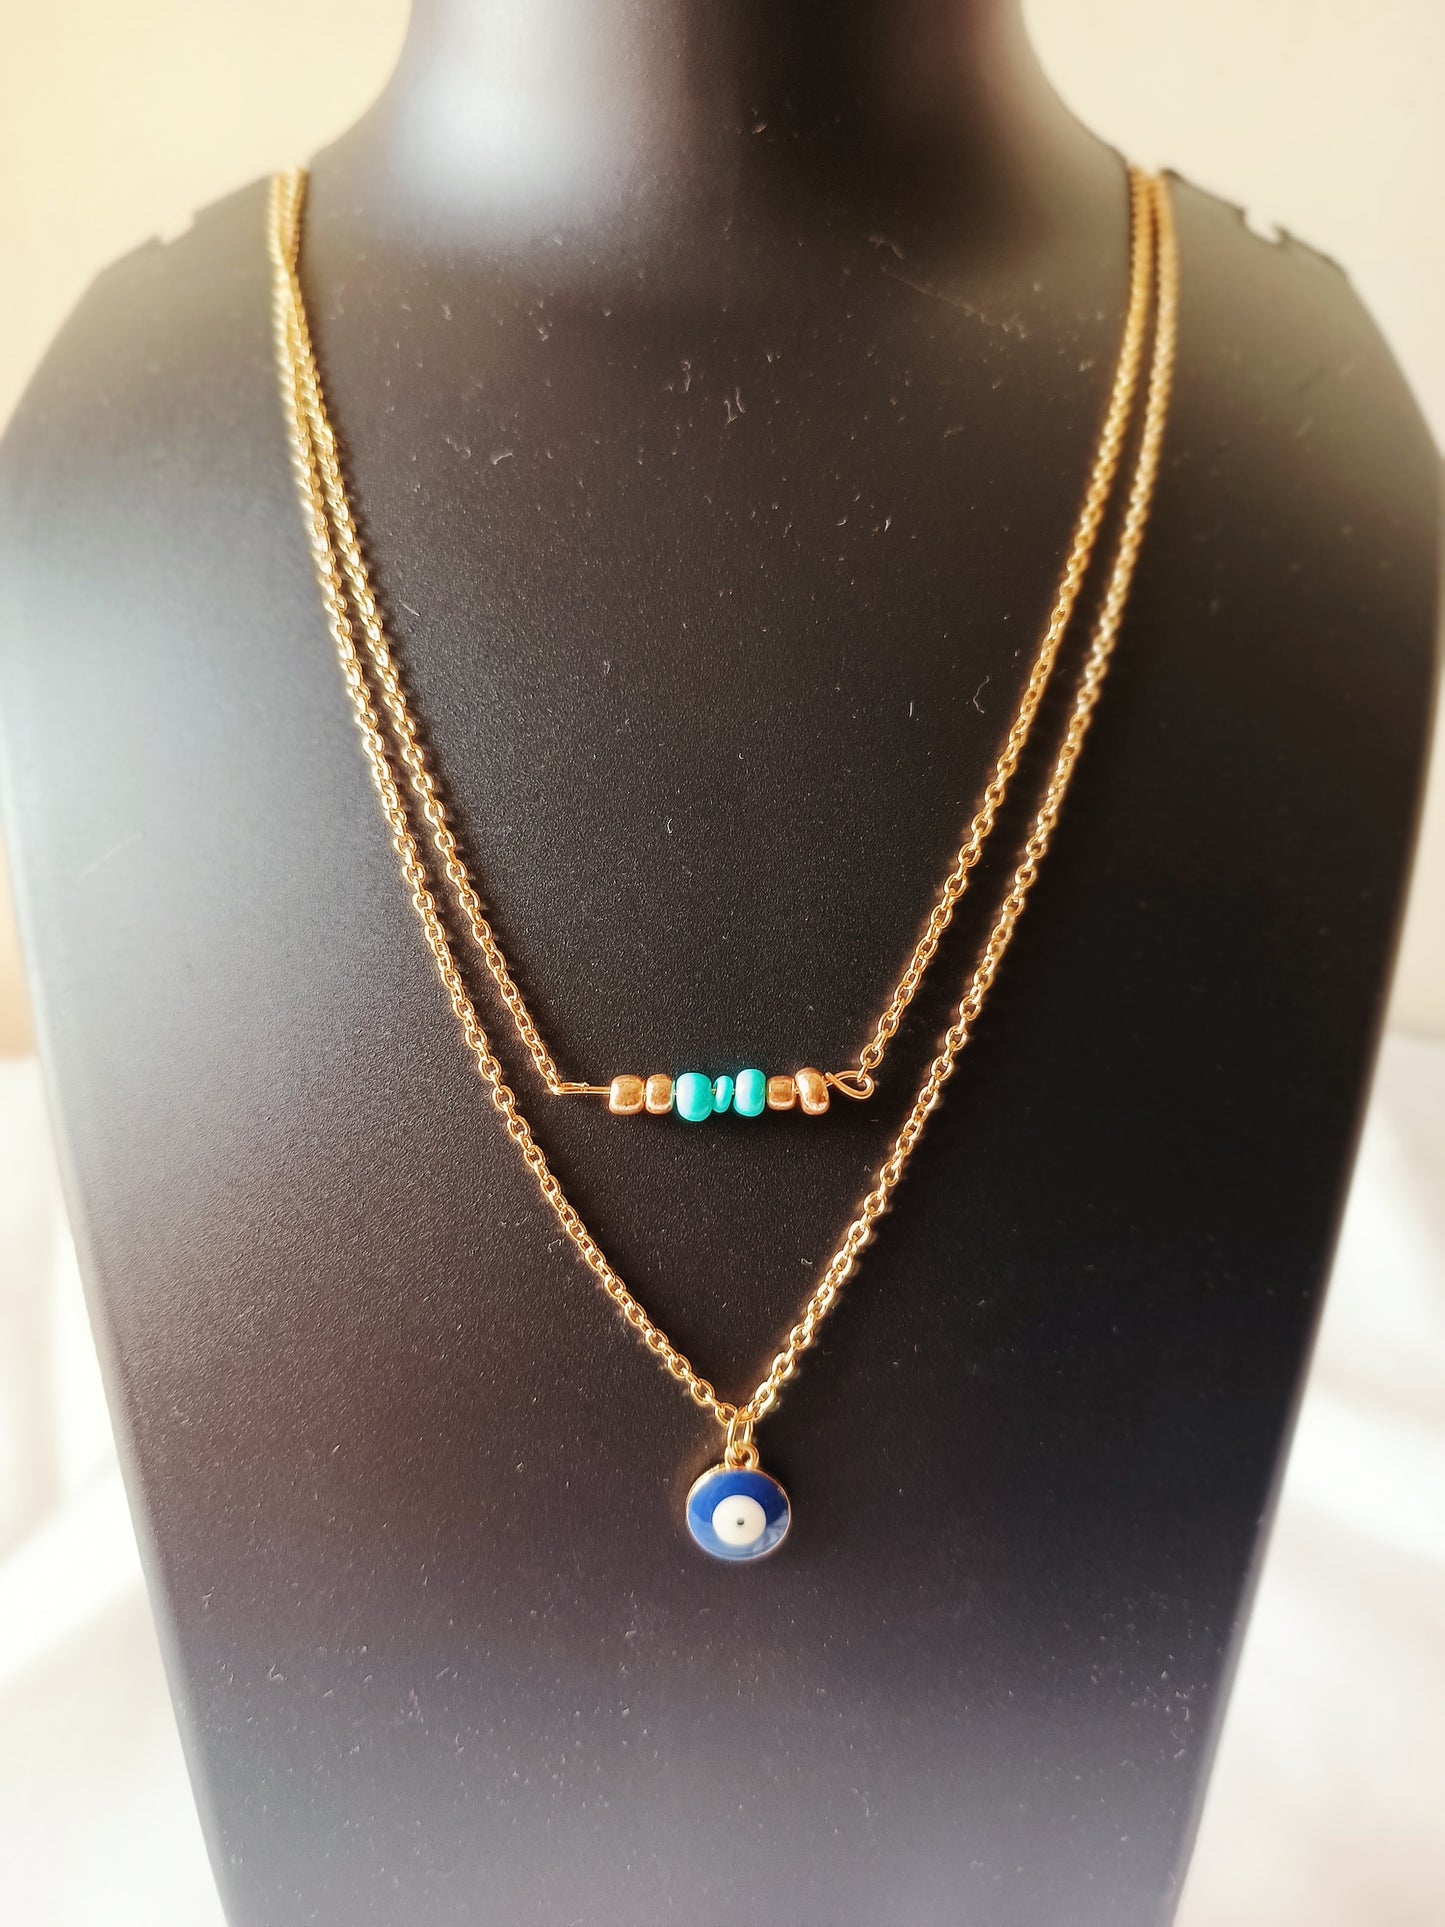 Double layered gold plated evil eye neckpiece - Jewellery for women and girls